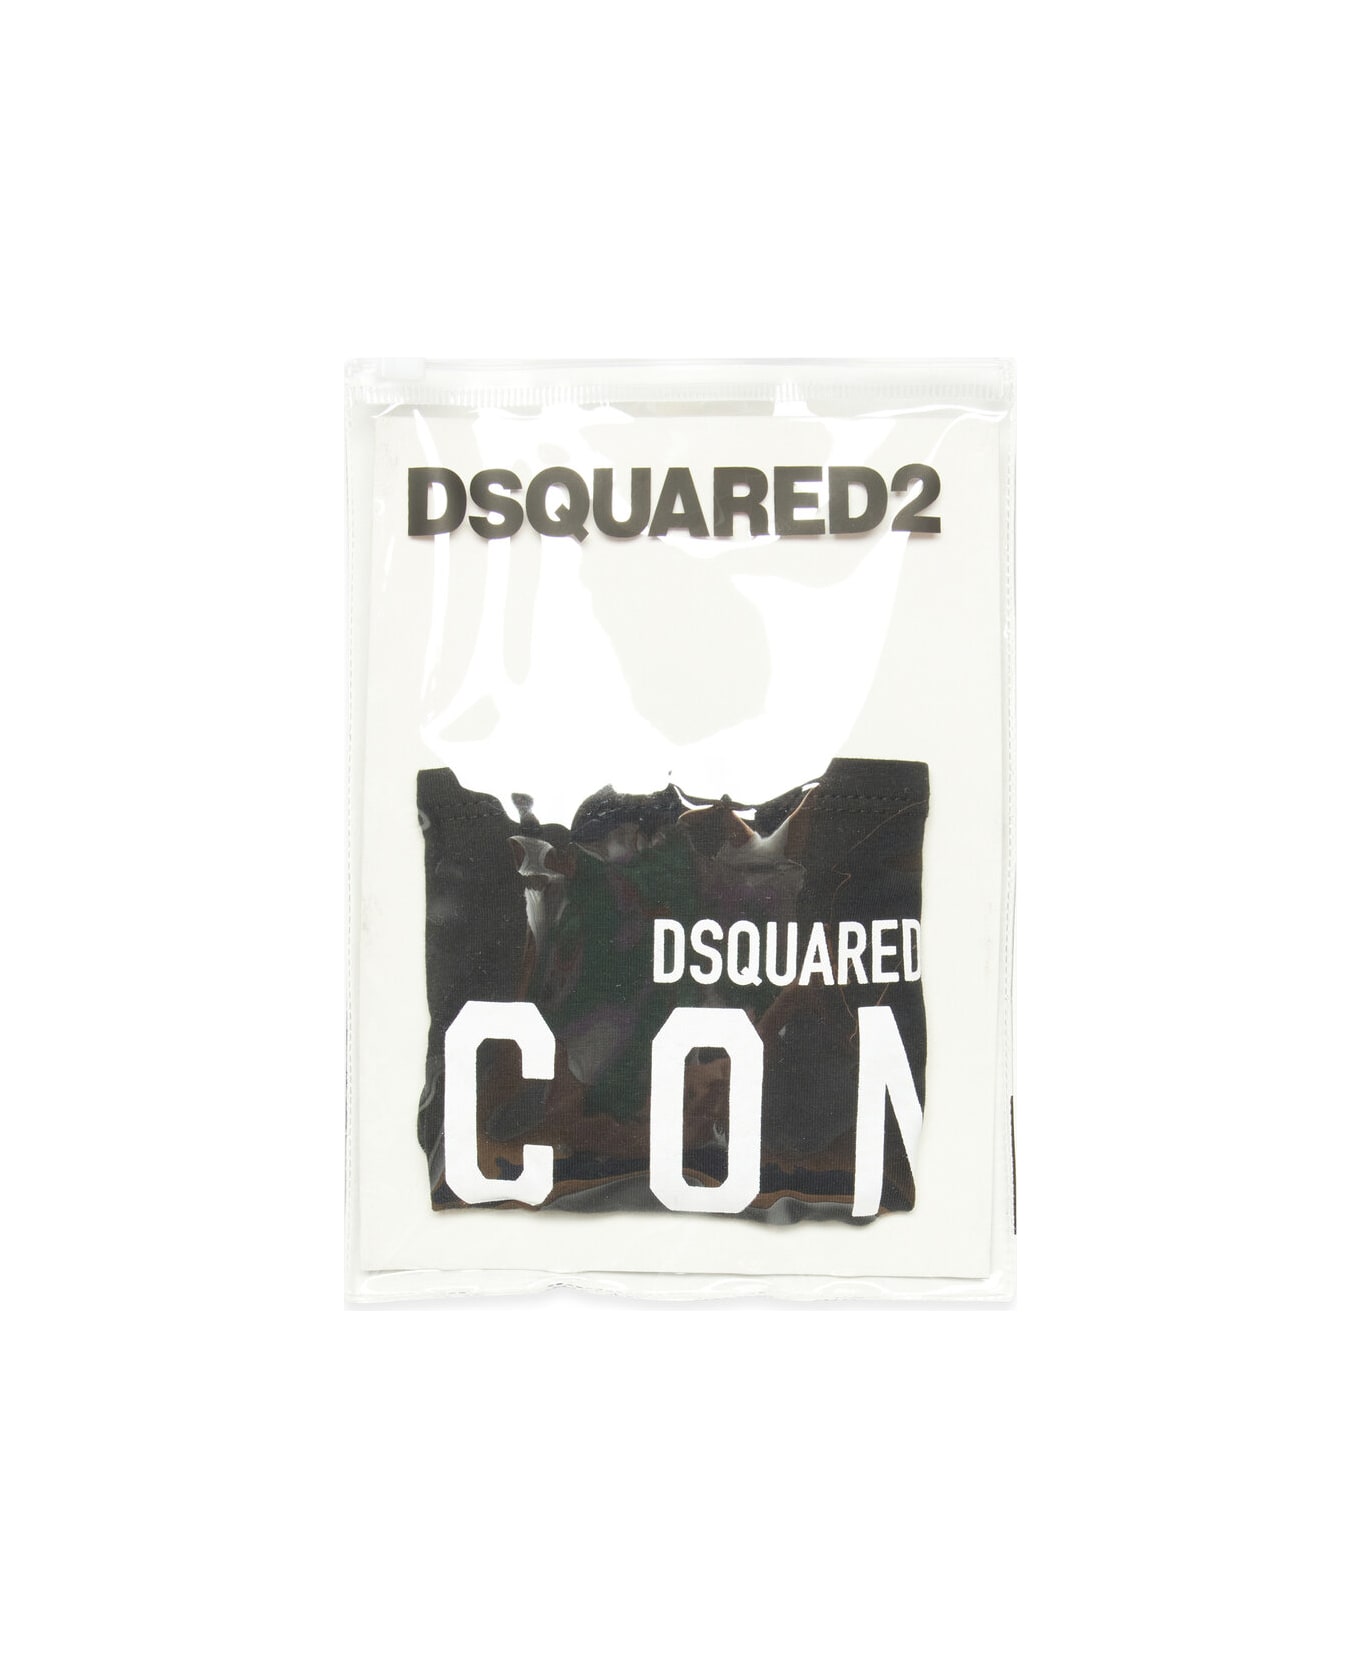 Dsquared2 D2uf3f-icon Uw Panties Dsquared Black Jersey Panties With Icon Logo - Black